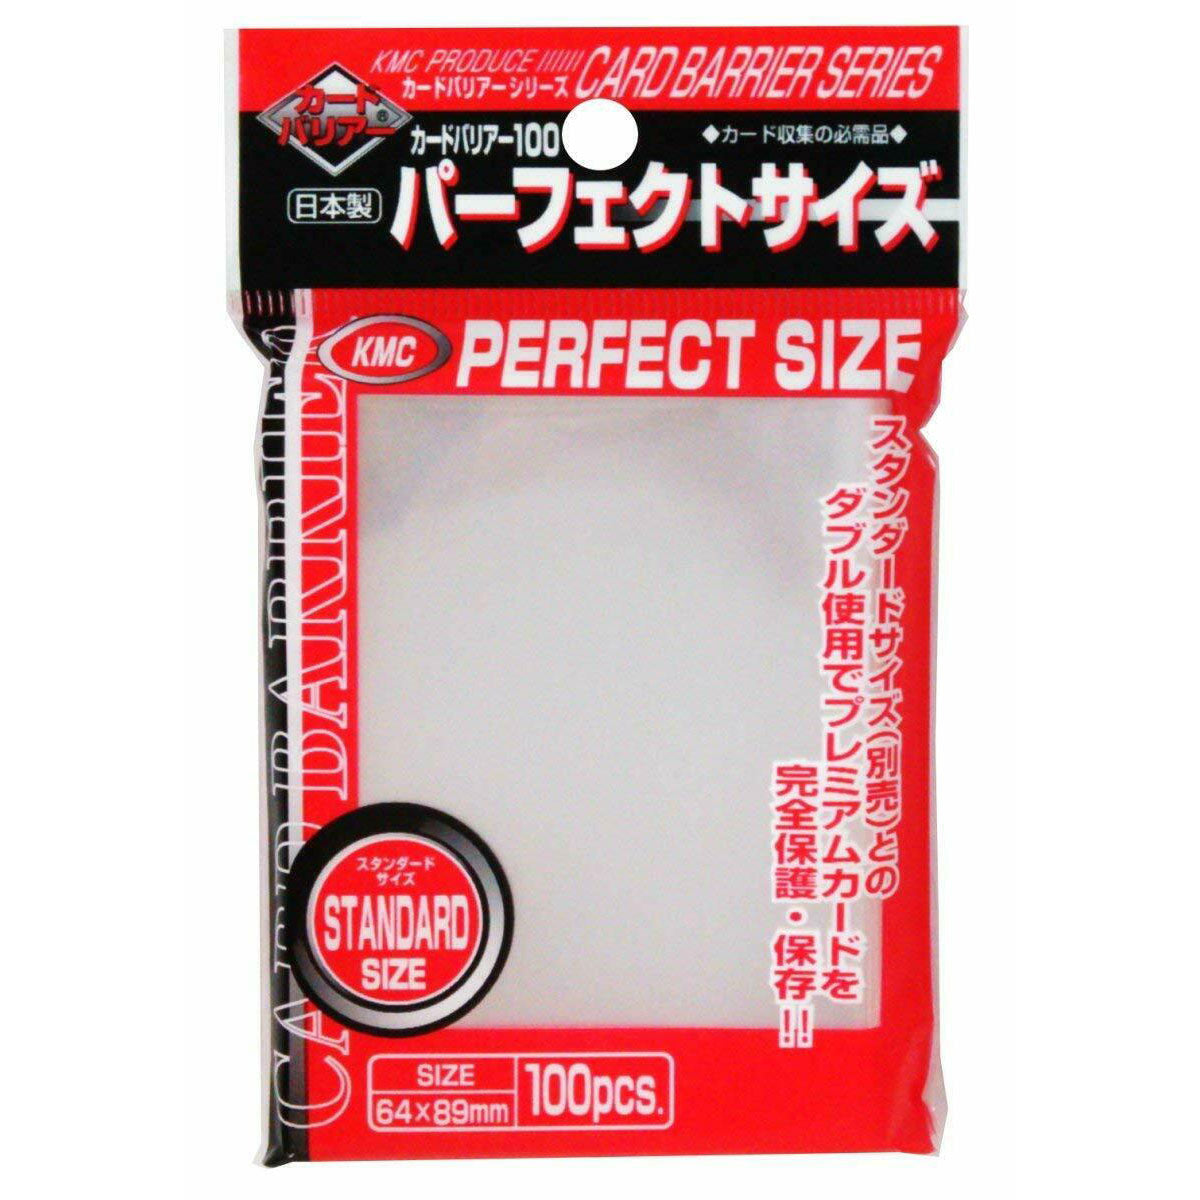 KMC Perfect Size Inner Sleeves (100 Count) - JPN